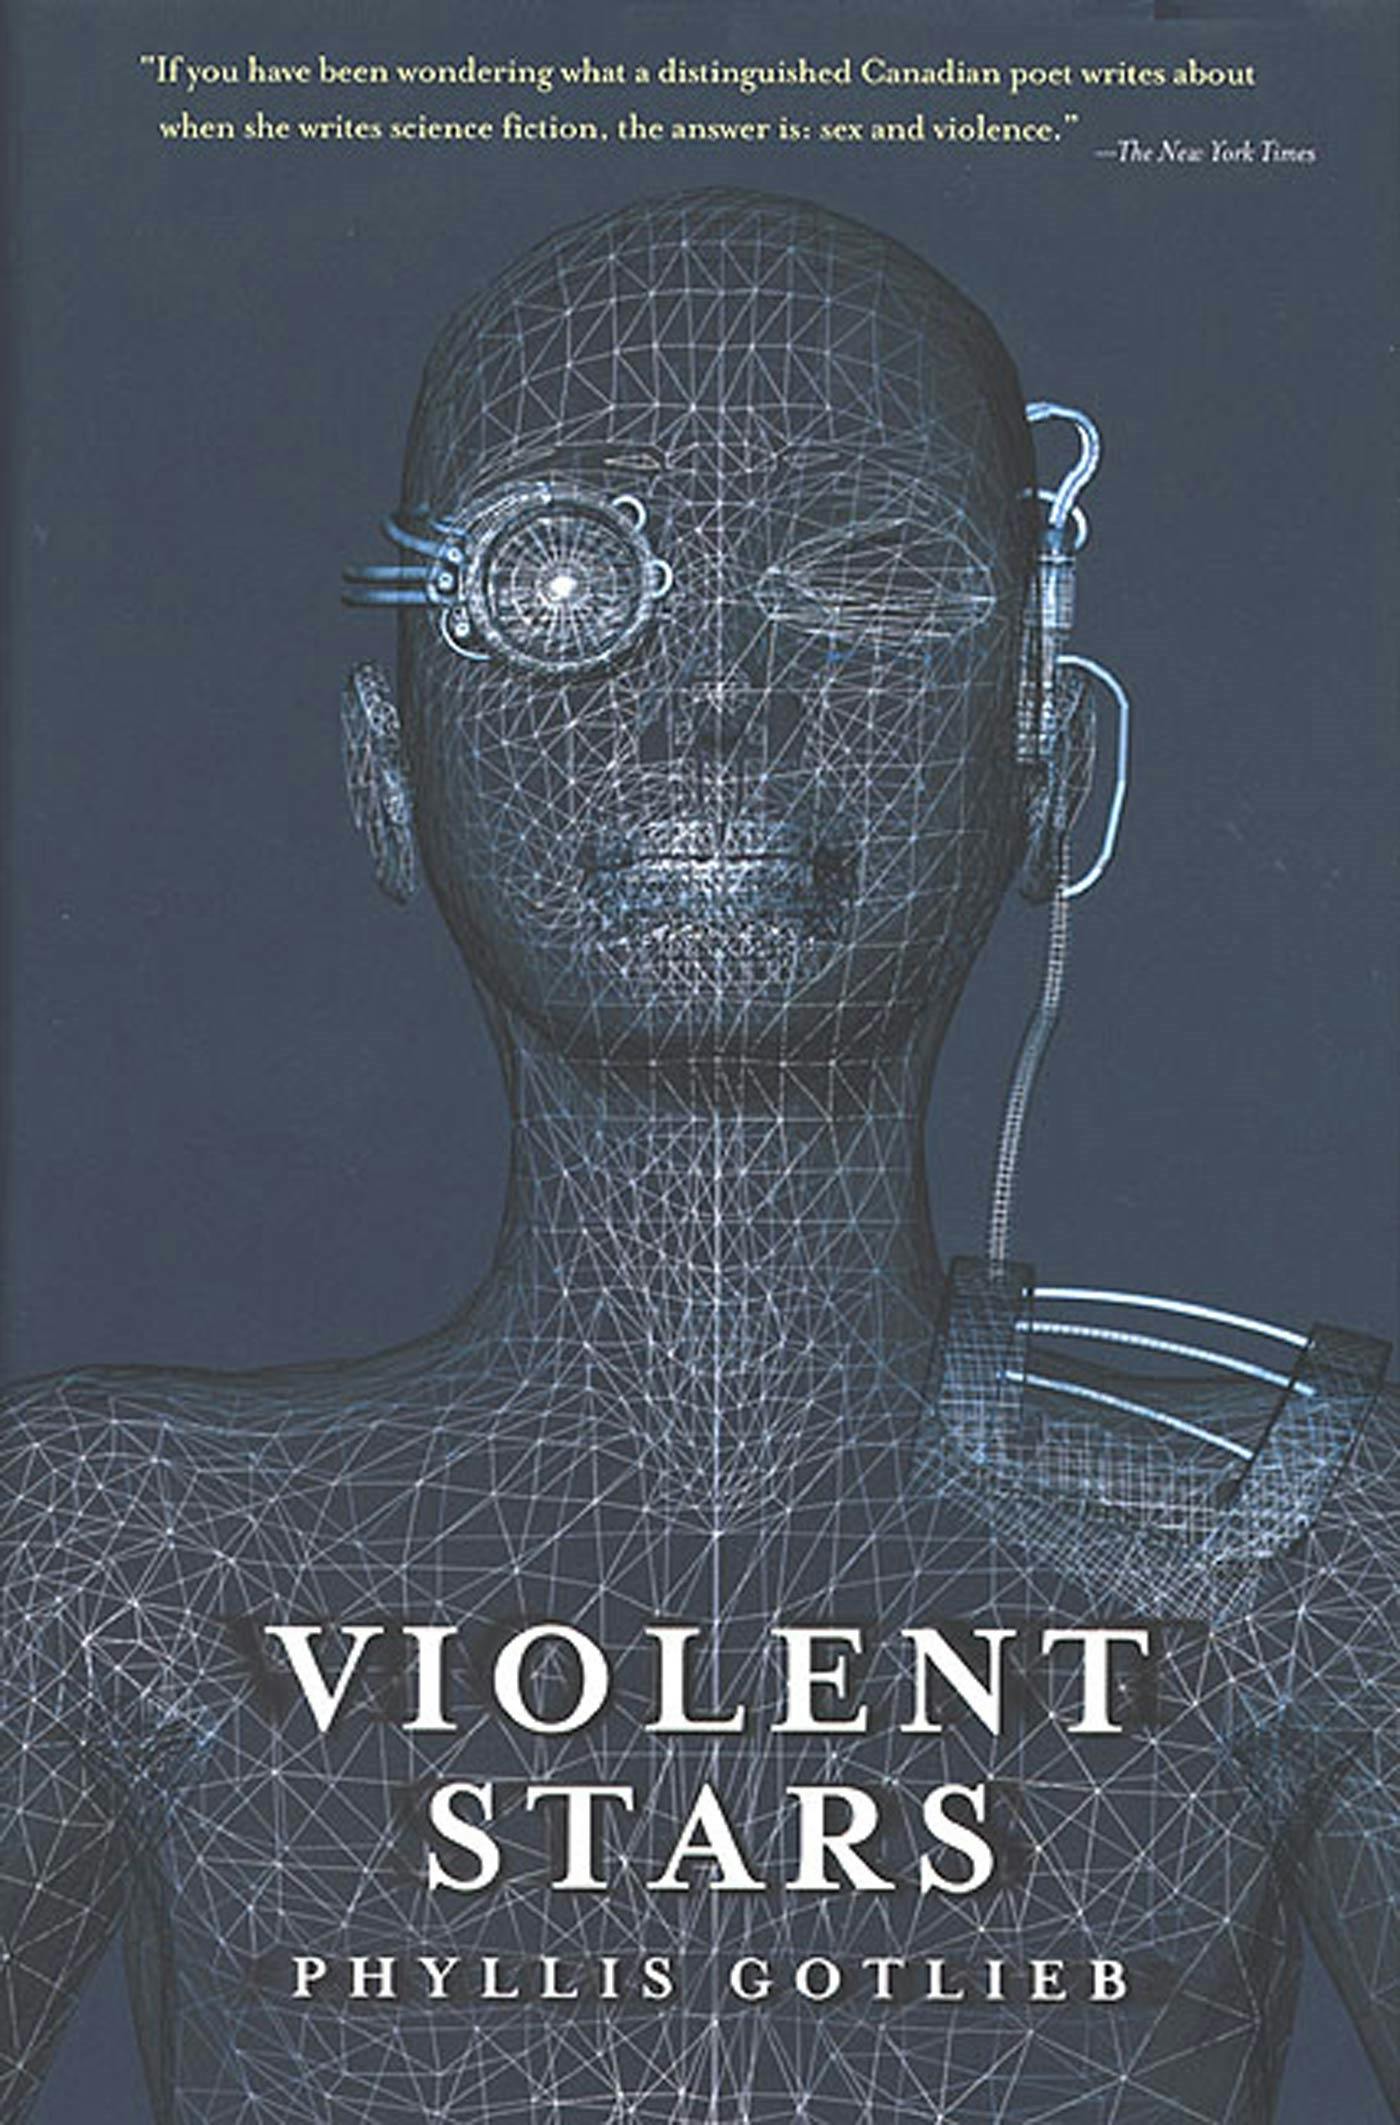 Cover for the book titled as: Violent Stars